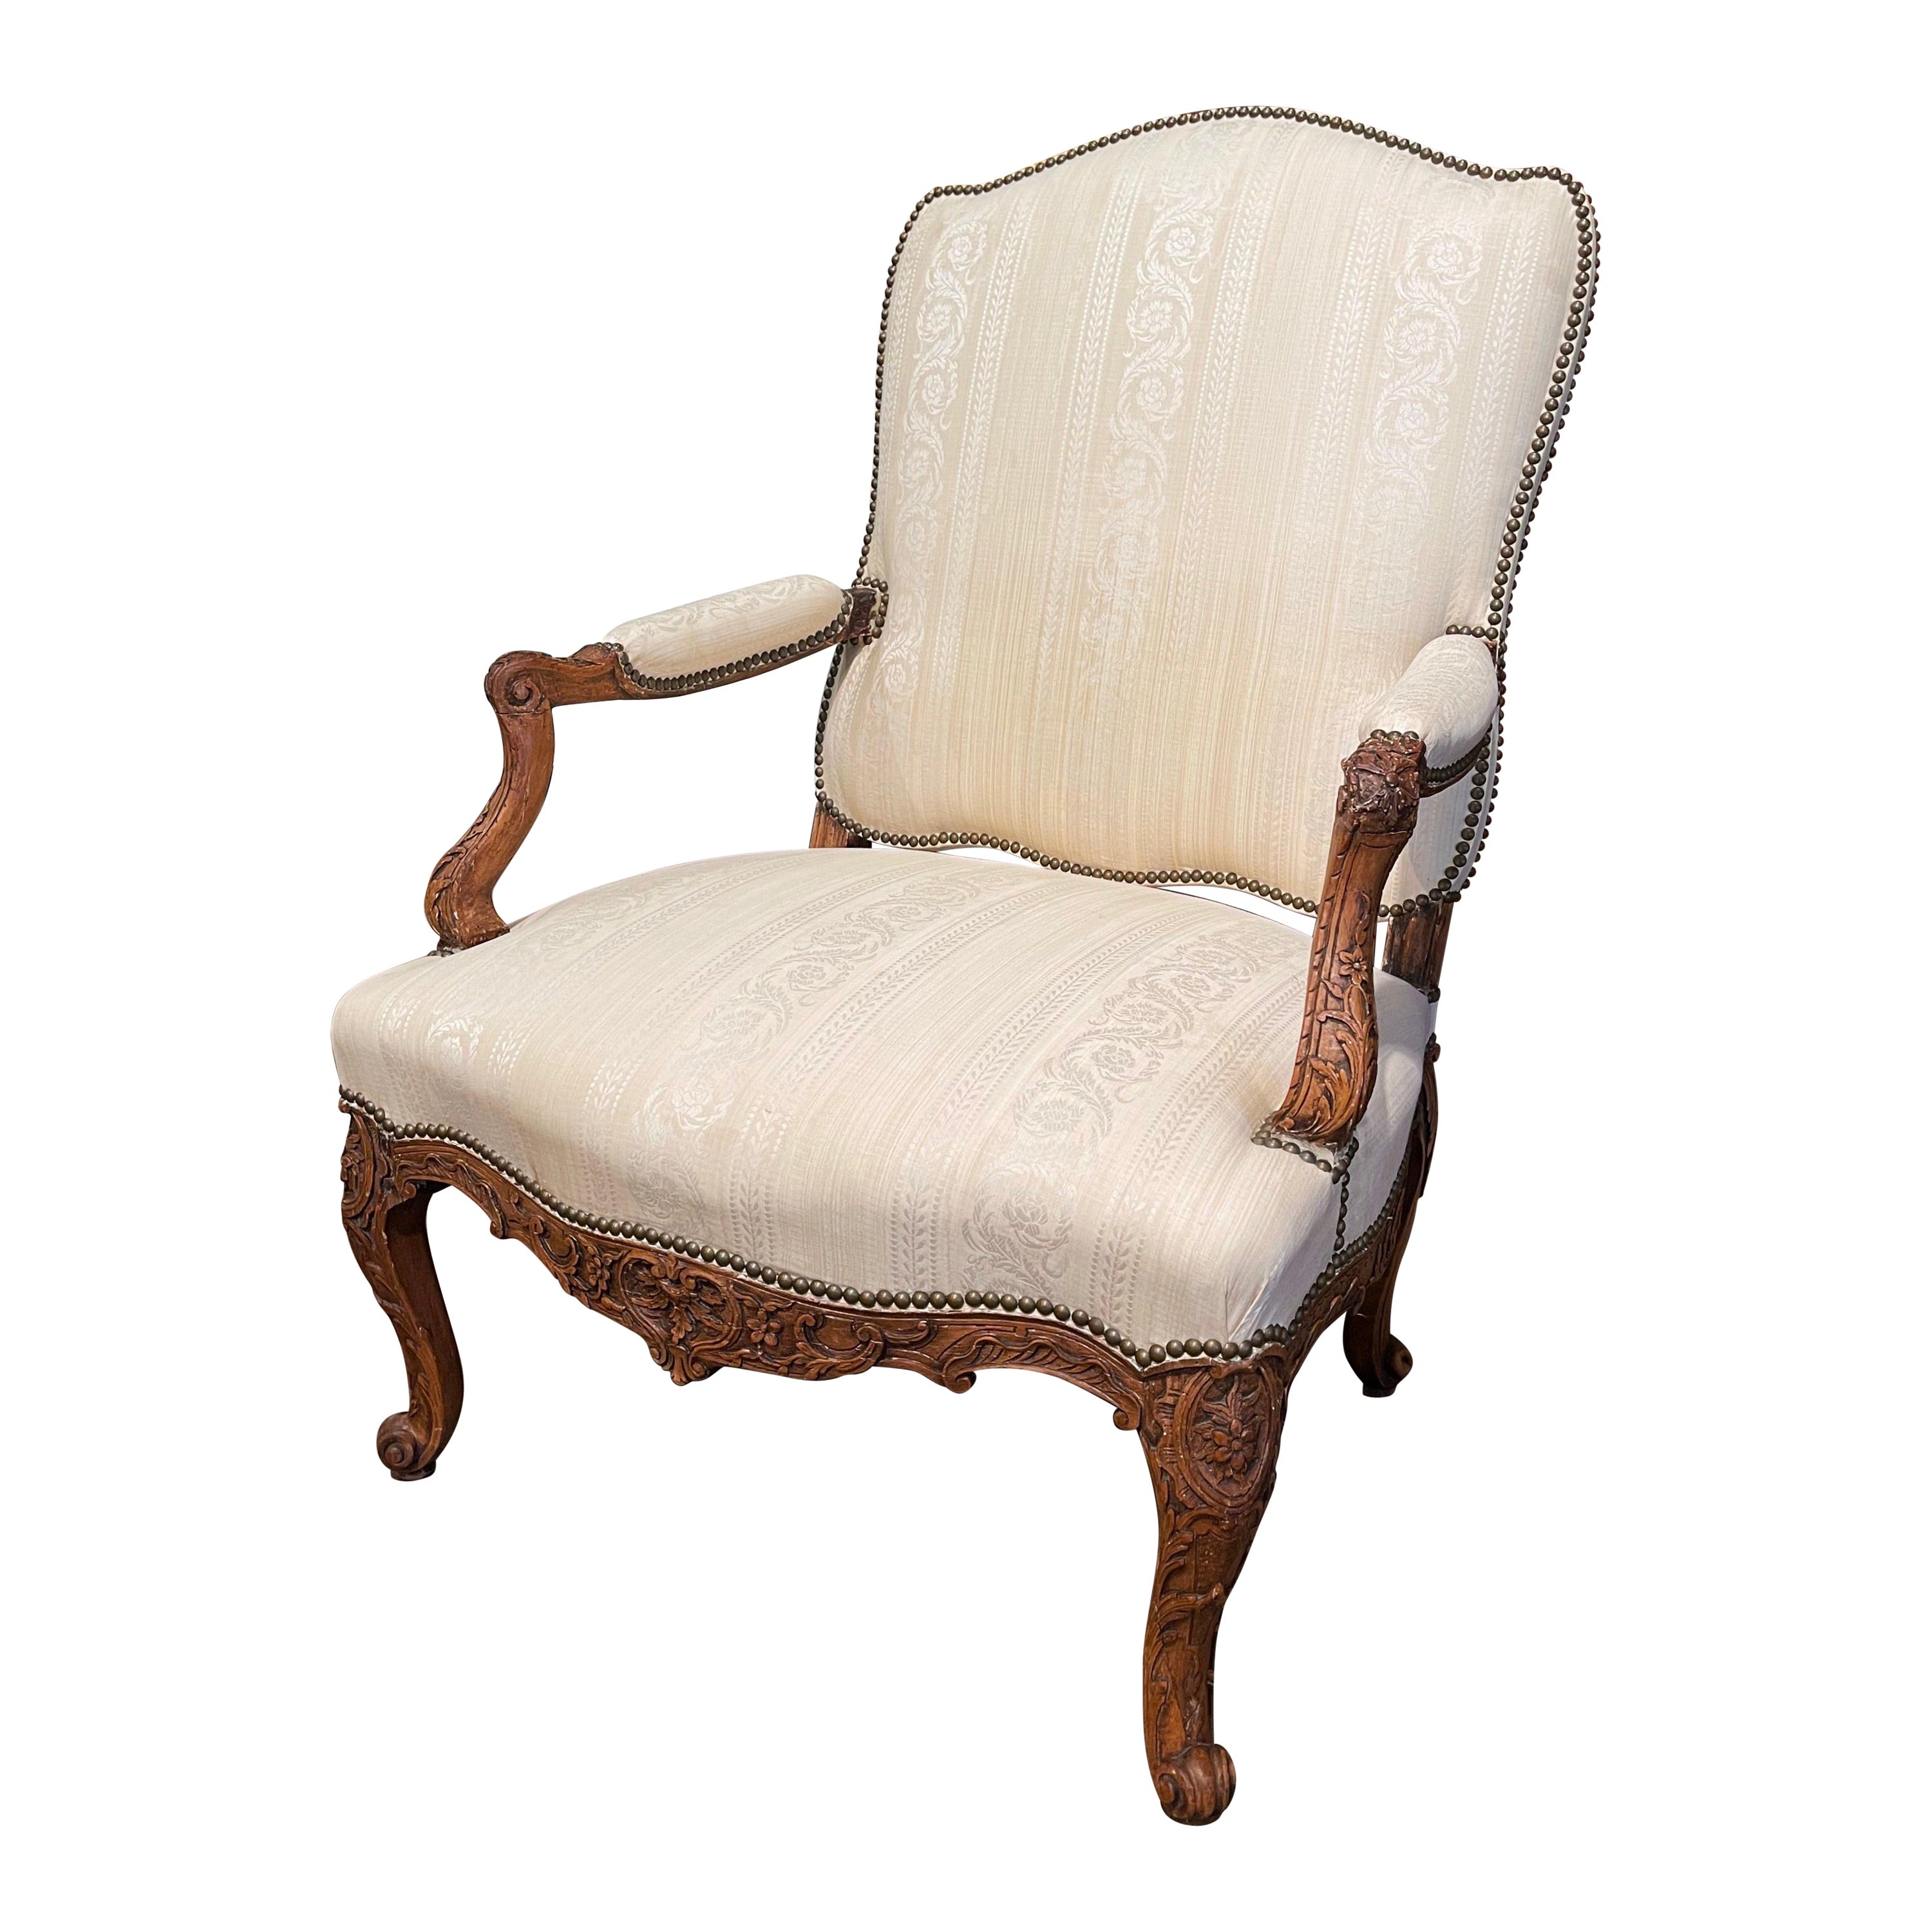 Mid-19th Century Louis XV Carved Walnut Upholstered Armchair from Provence For Sale